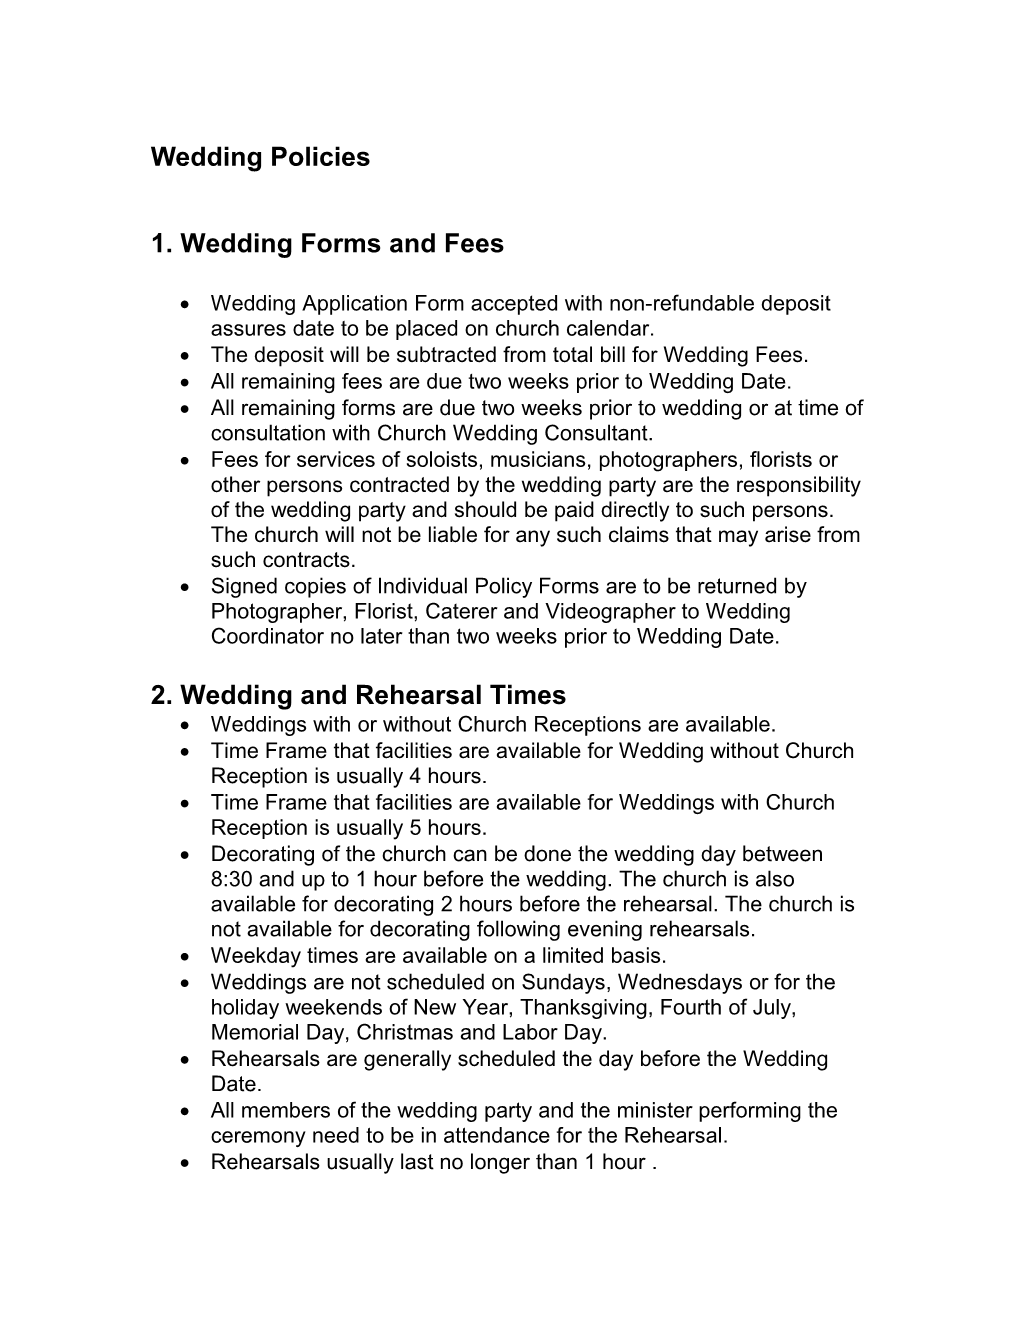 1. Wedding Forms and Fees